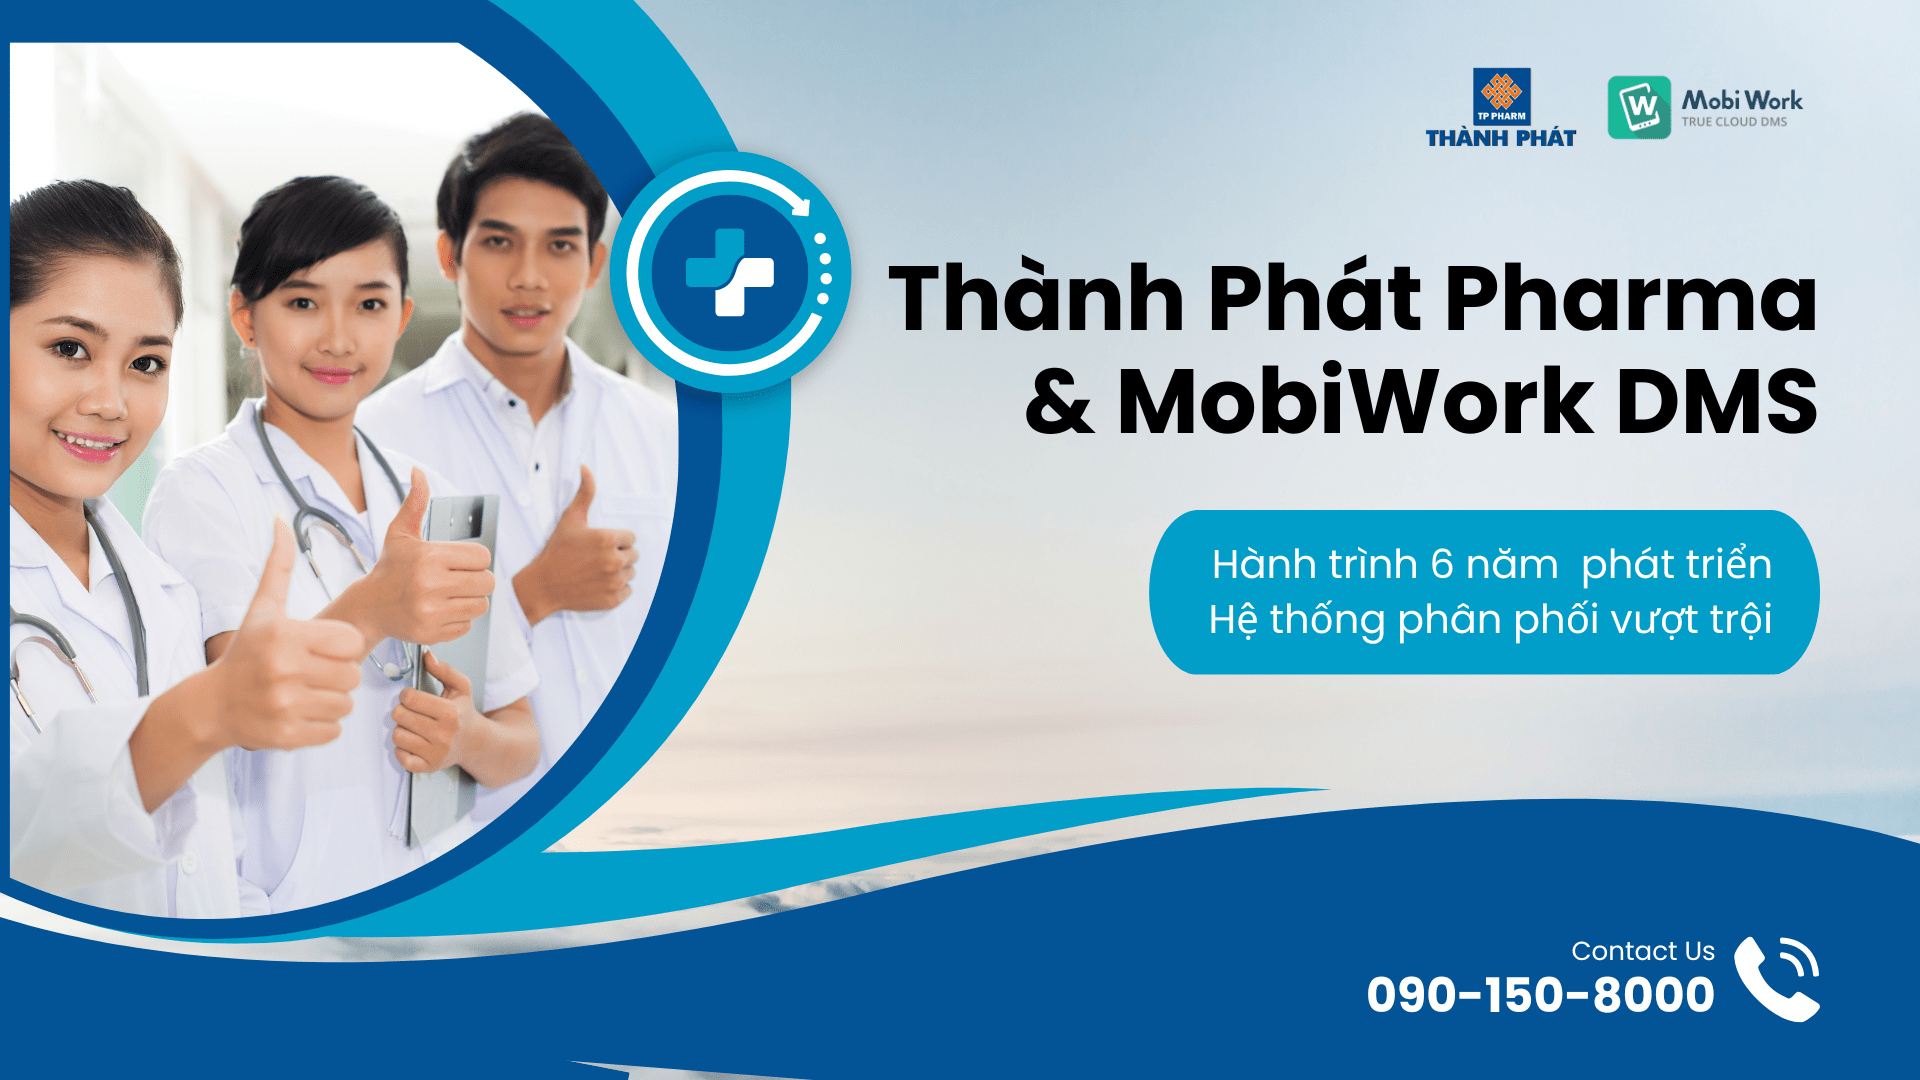 duoc-pham-thanh-phat-ung-dung-mobiwork-dms